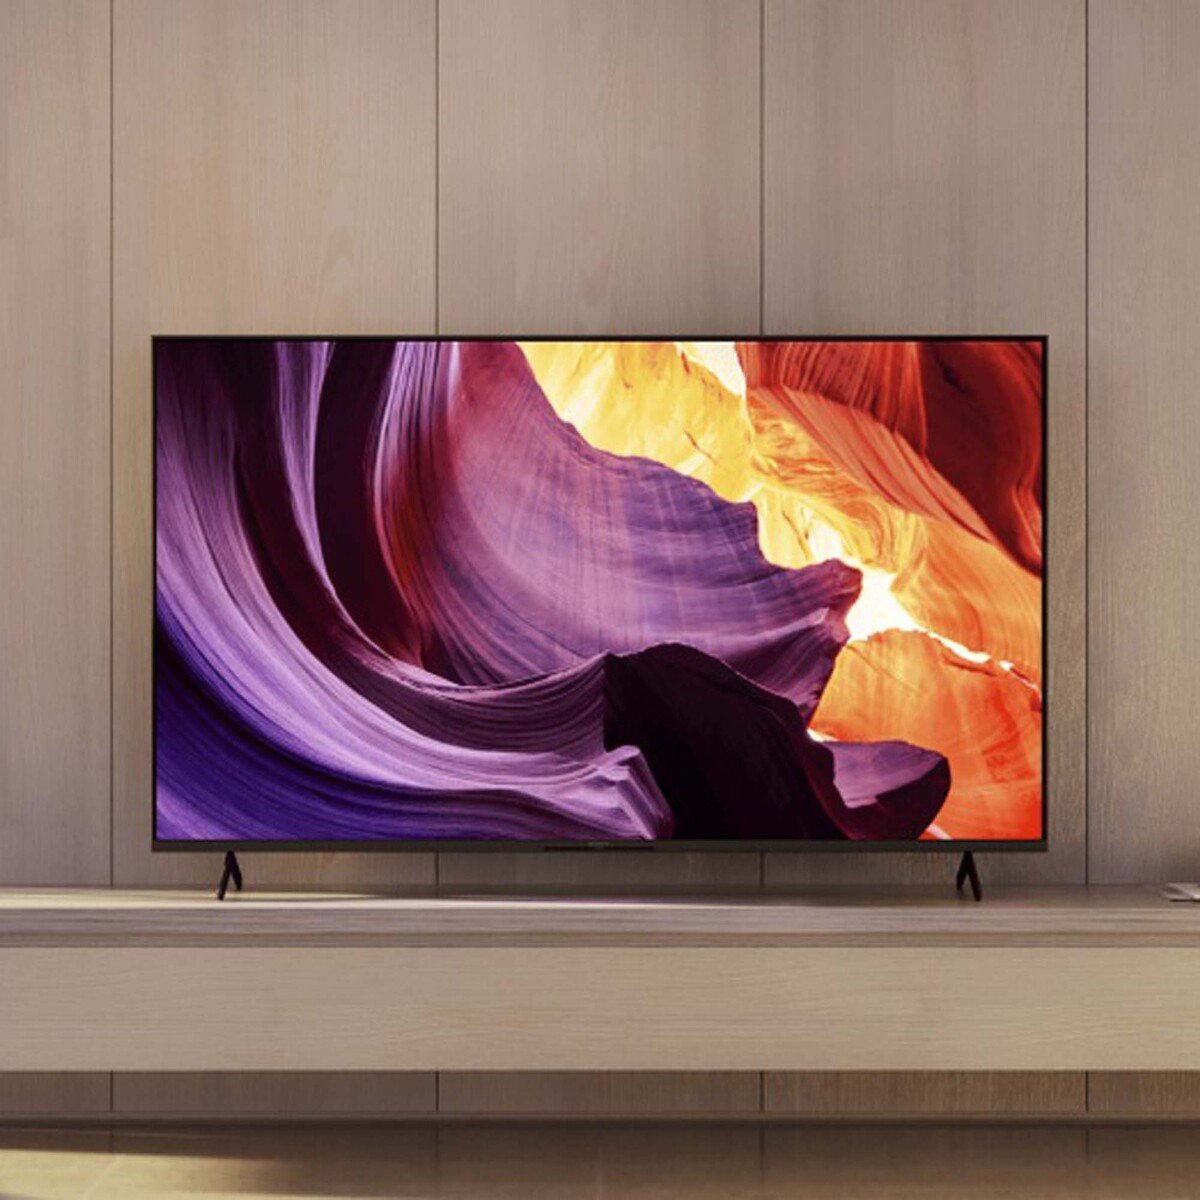 Sony 75 Inches 4K HDR LED Smart Google TV KD-75X80K